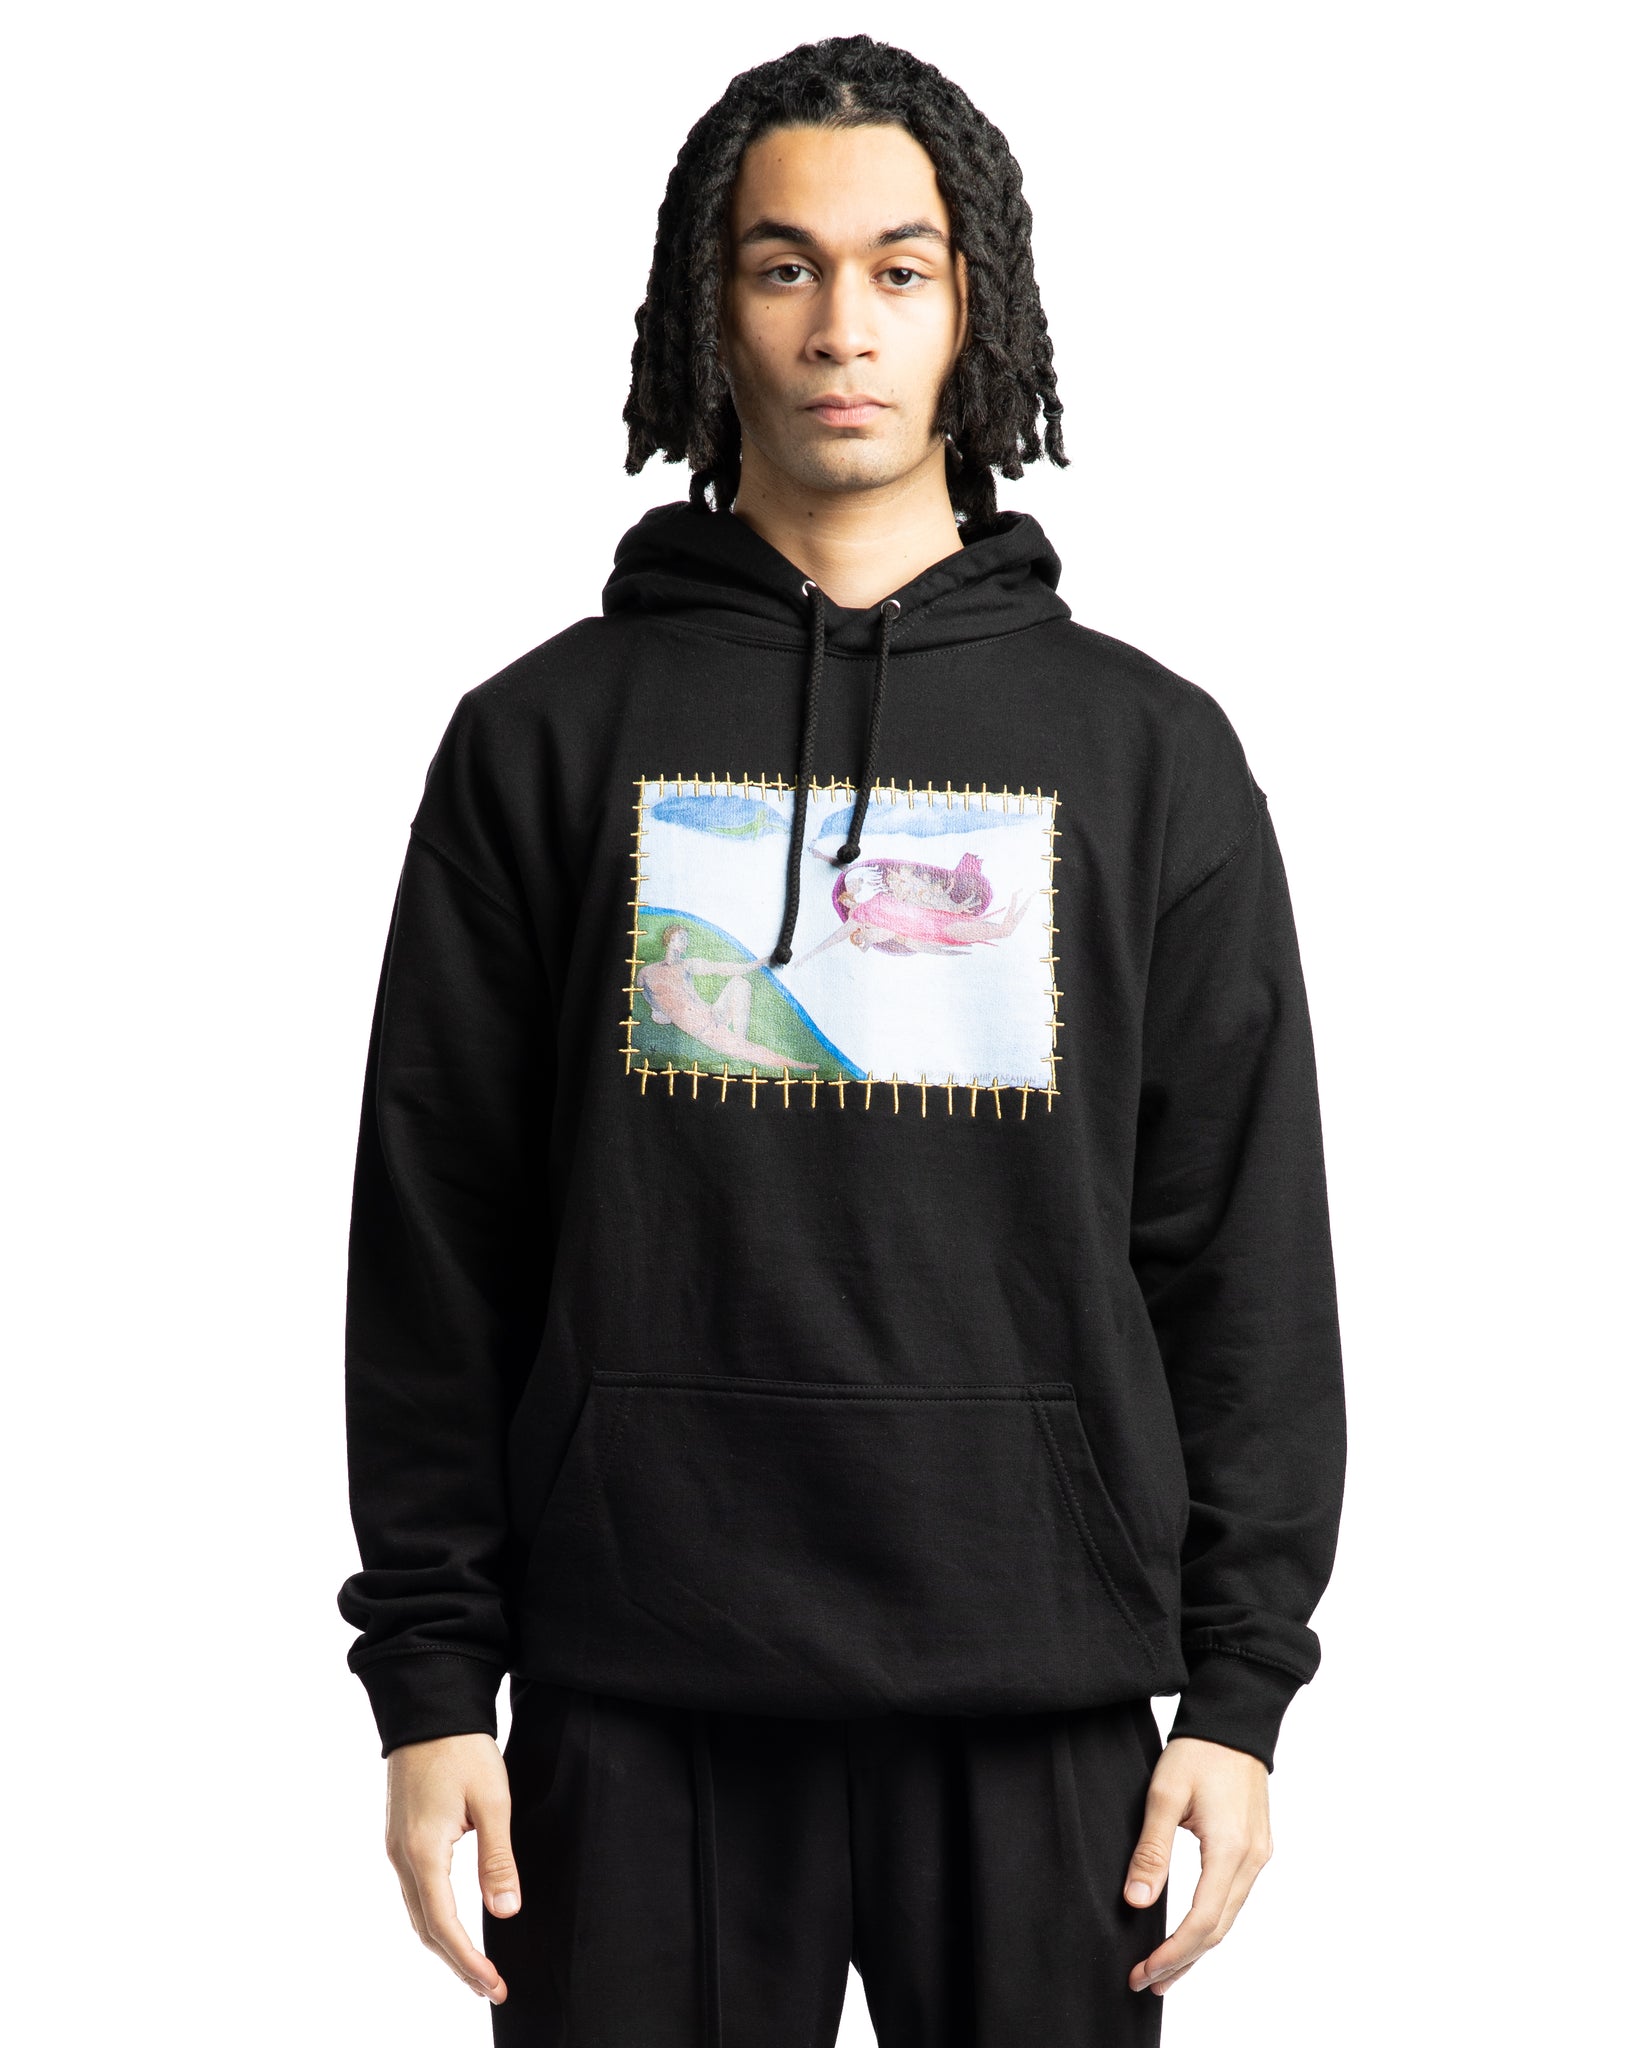 Come To My Church Inspiration Hoodie Black